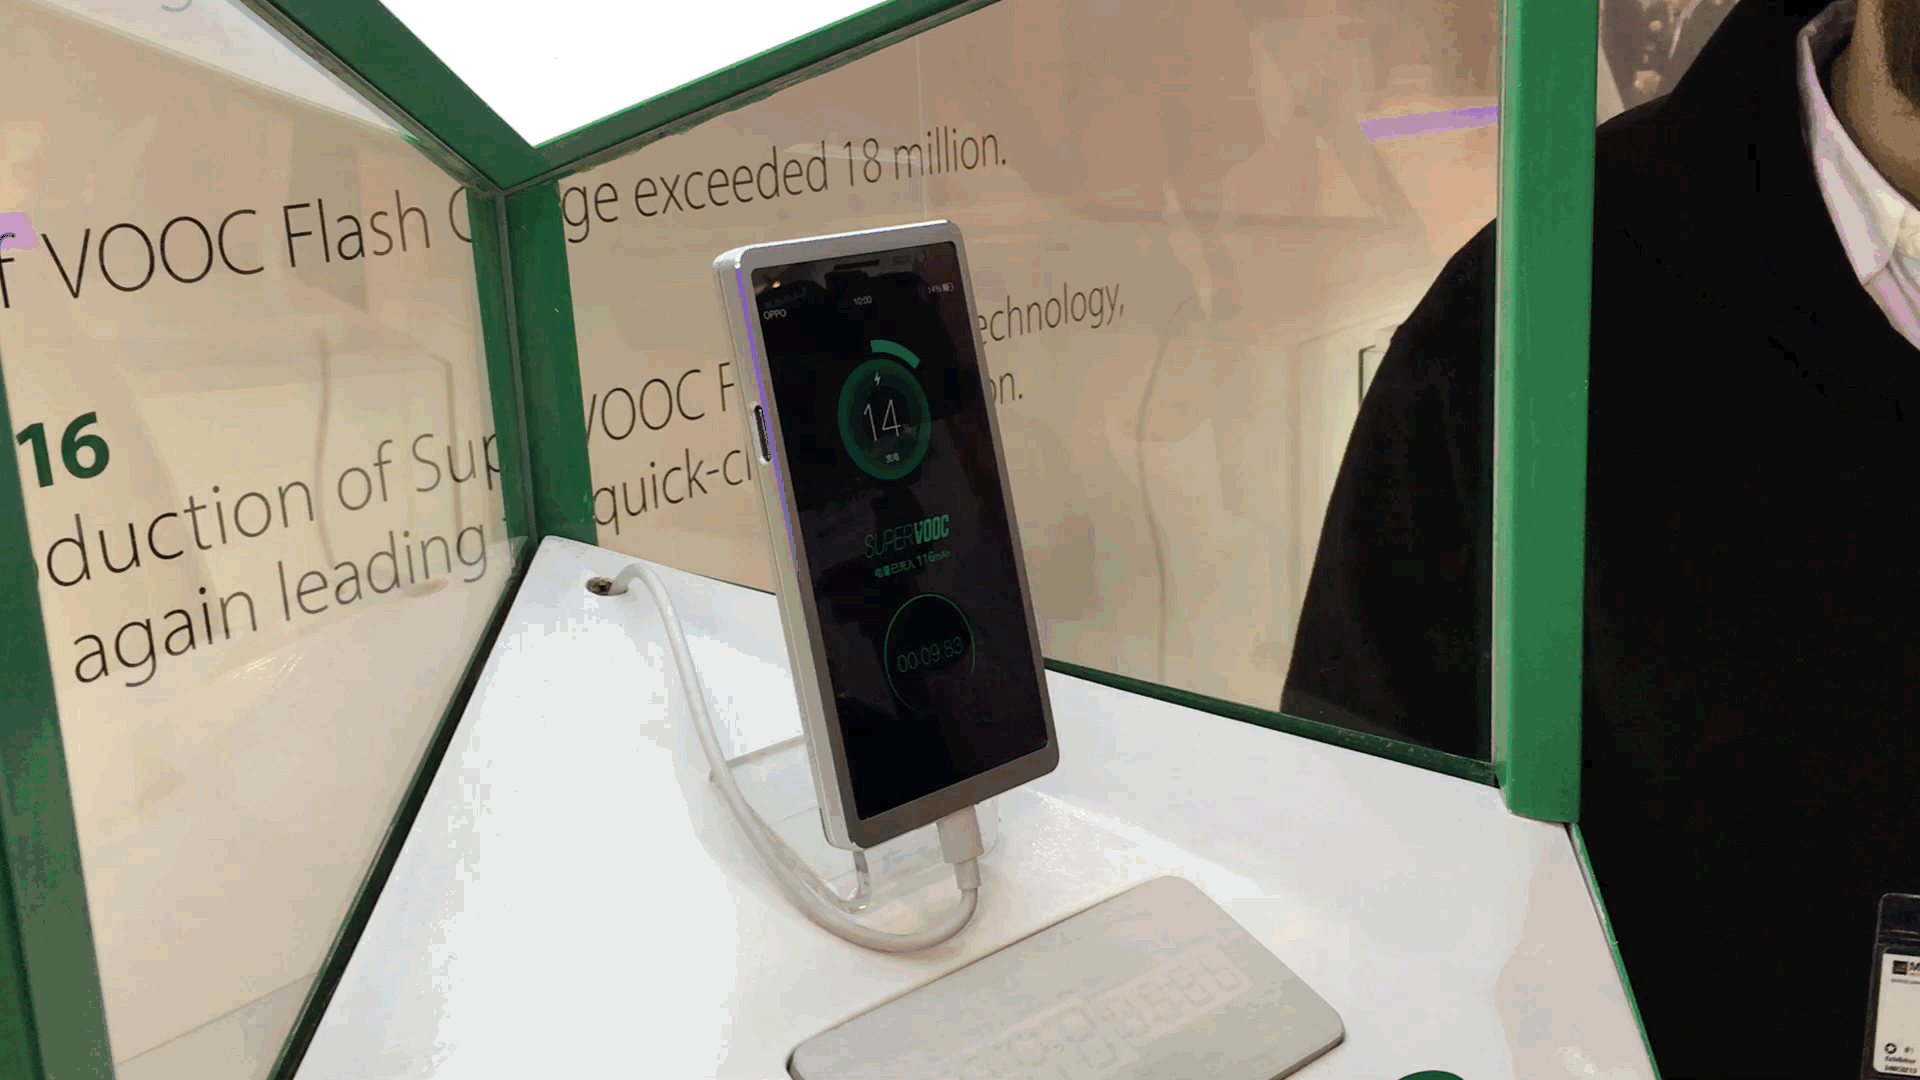 mwc-2016-oppo-super-vook-full-charge